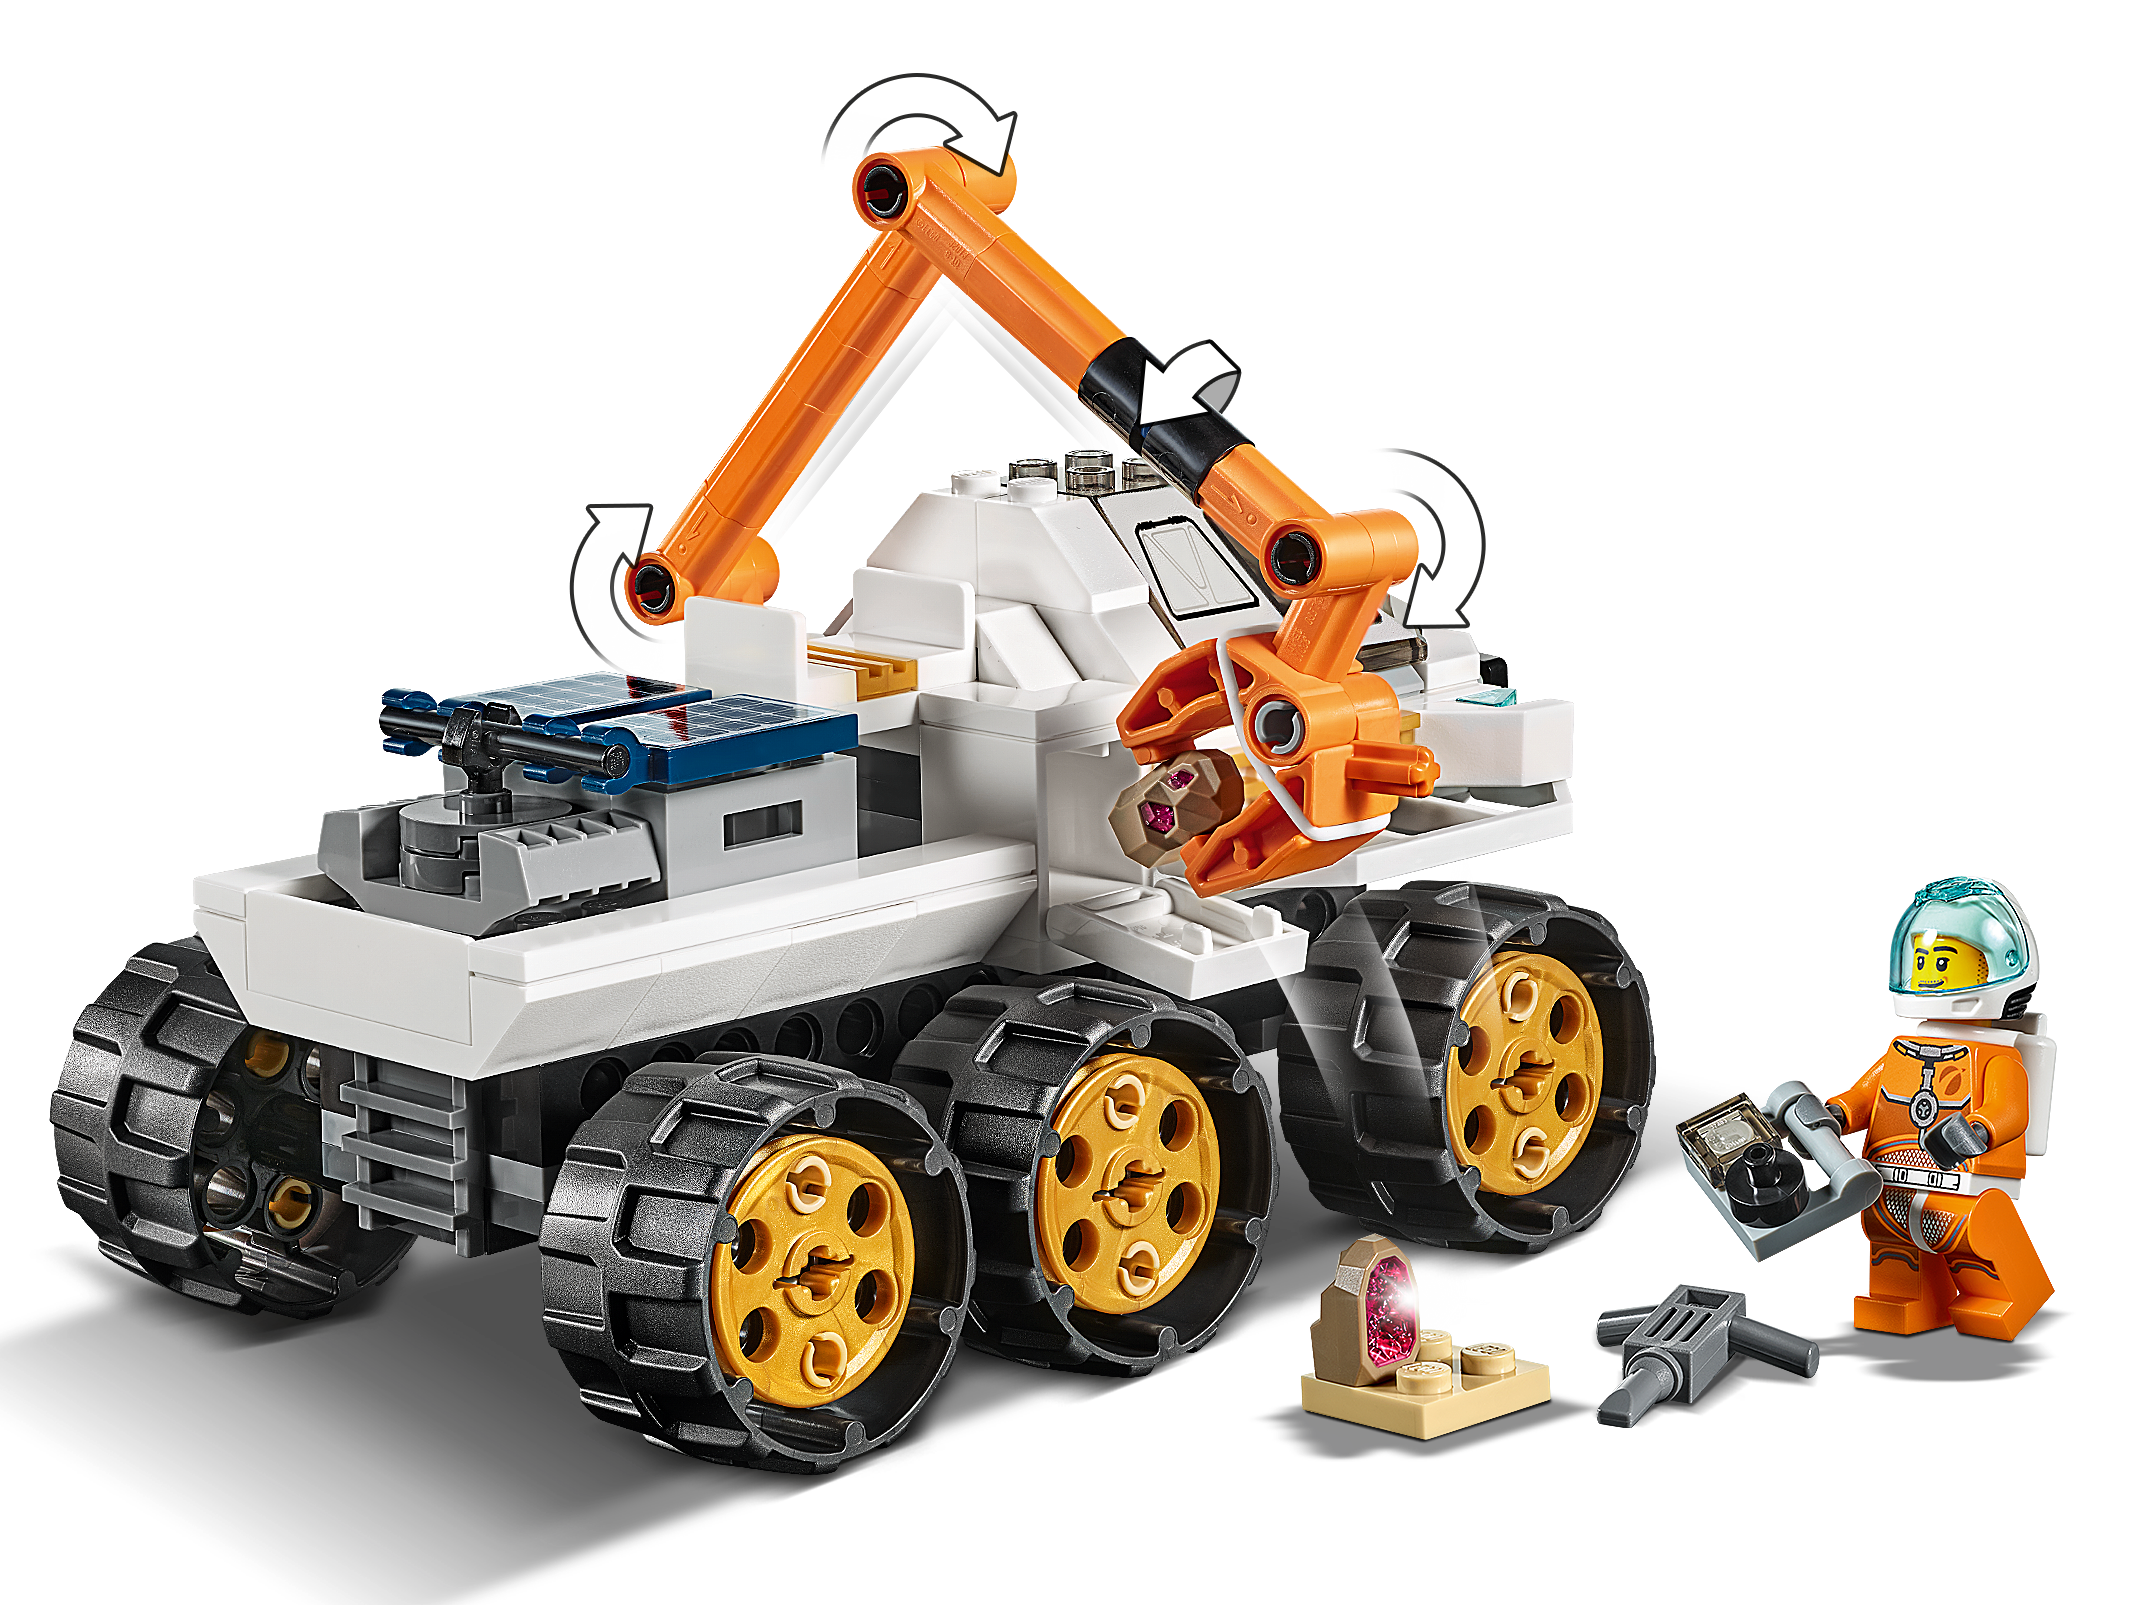 Rover Testing Drive 60225 City | Buy online at the Official LEGO® Shop US